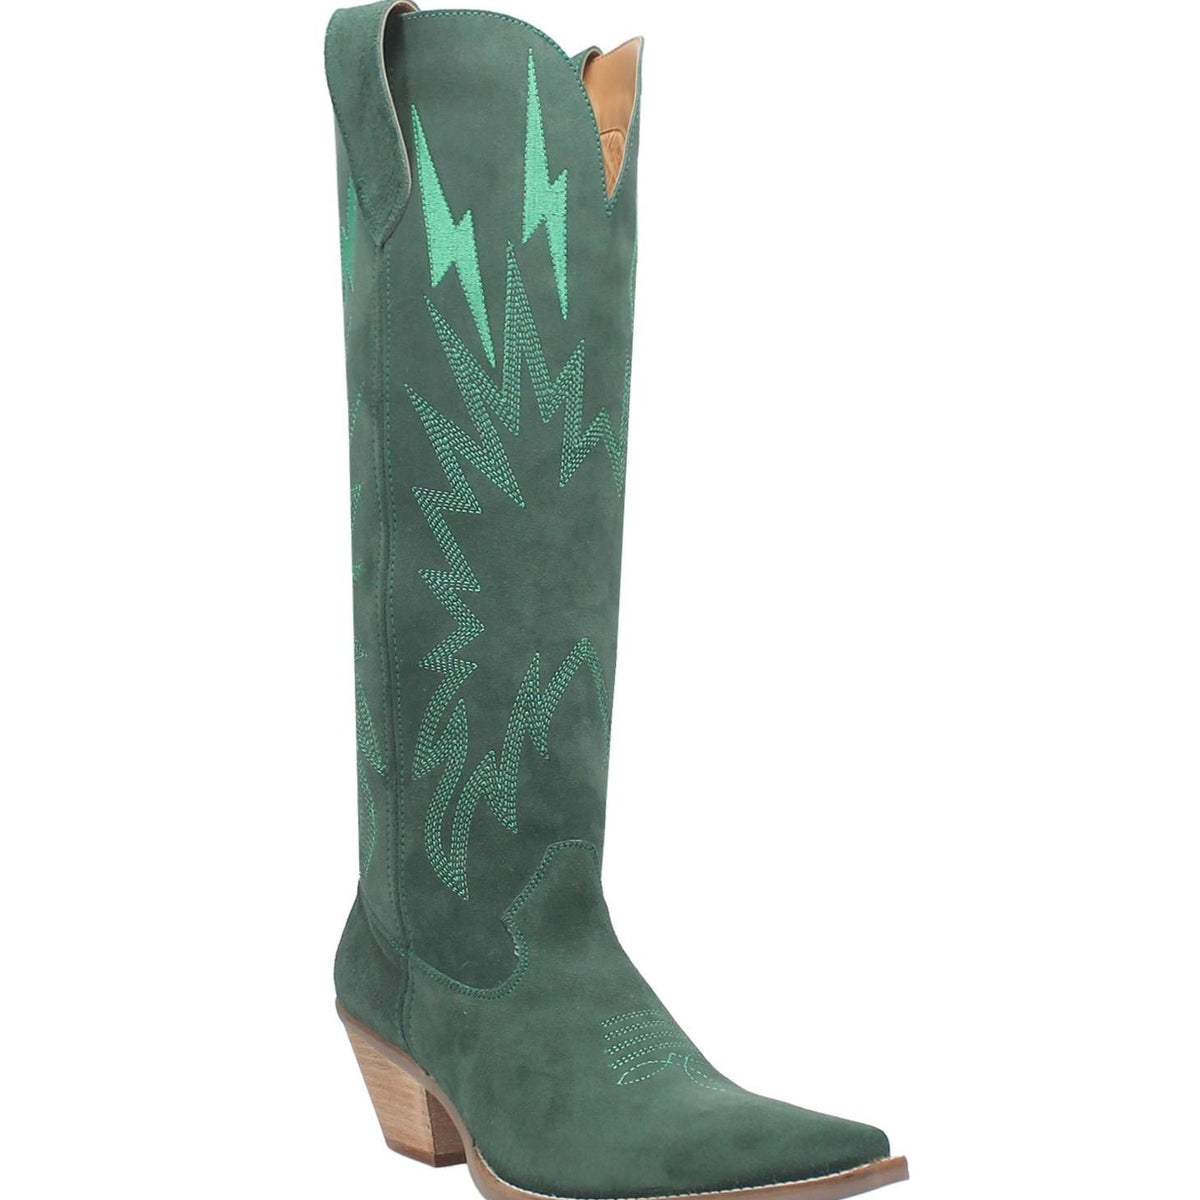 Dingo Women's Thunder Road Suede Boot in Green